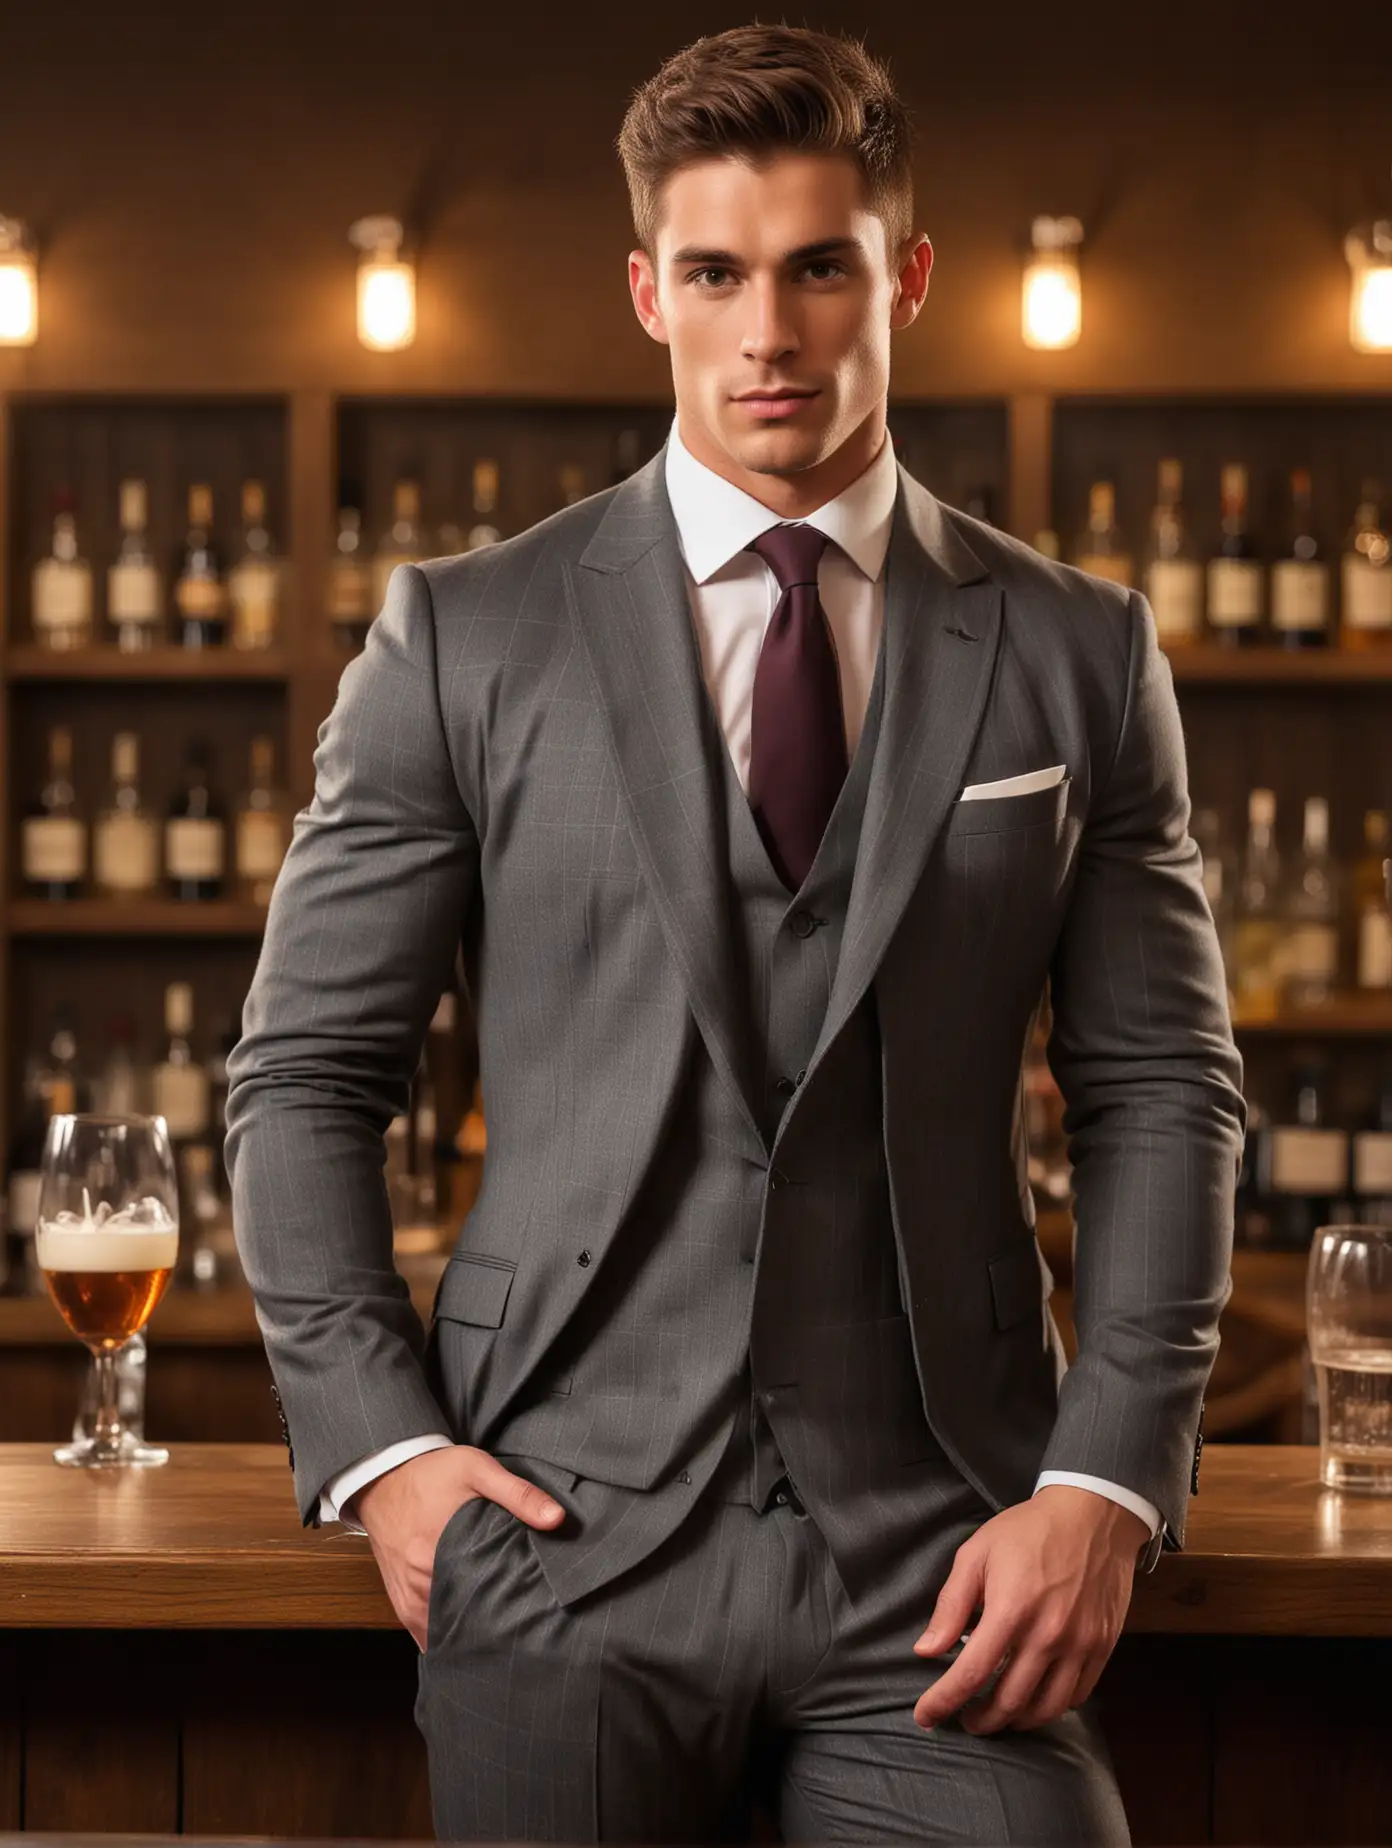 British, gorgeous suit, sexy muscular male model in the bar,
Full body shot, soft lighting, warm colors, soft shadows, professional portrait photography,
Natural makeup, perfect figure, beautiful and confident
